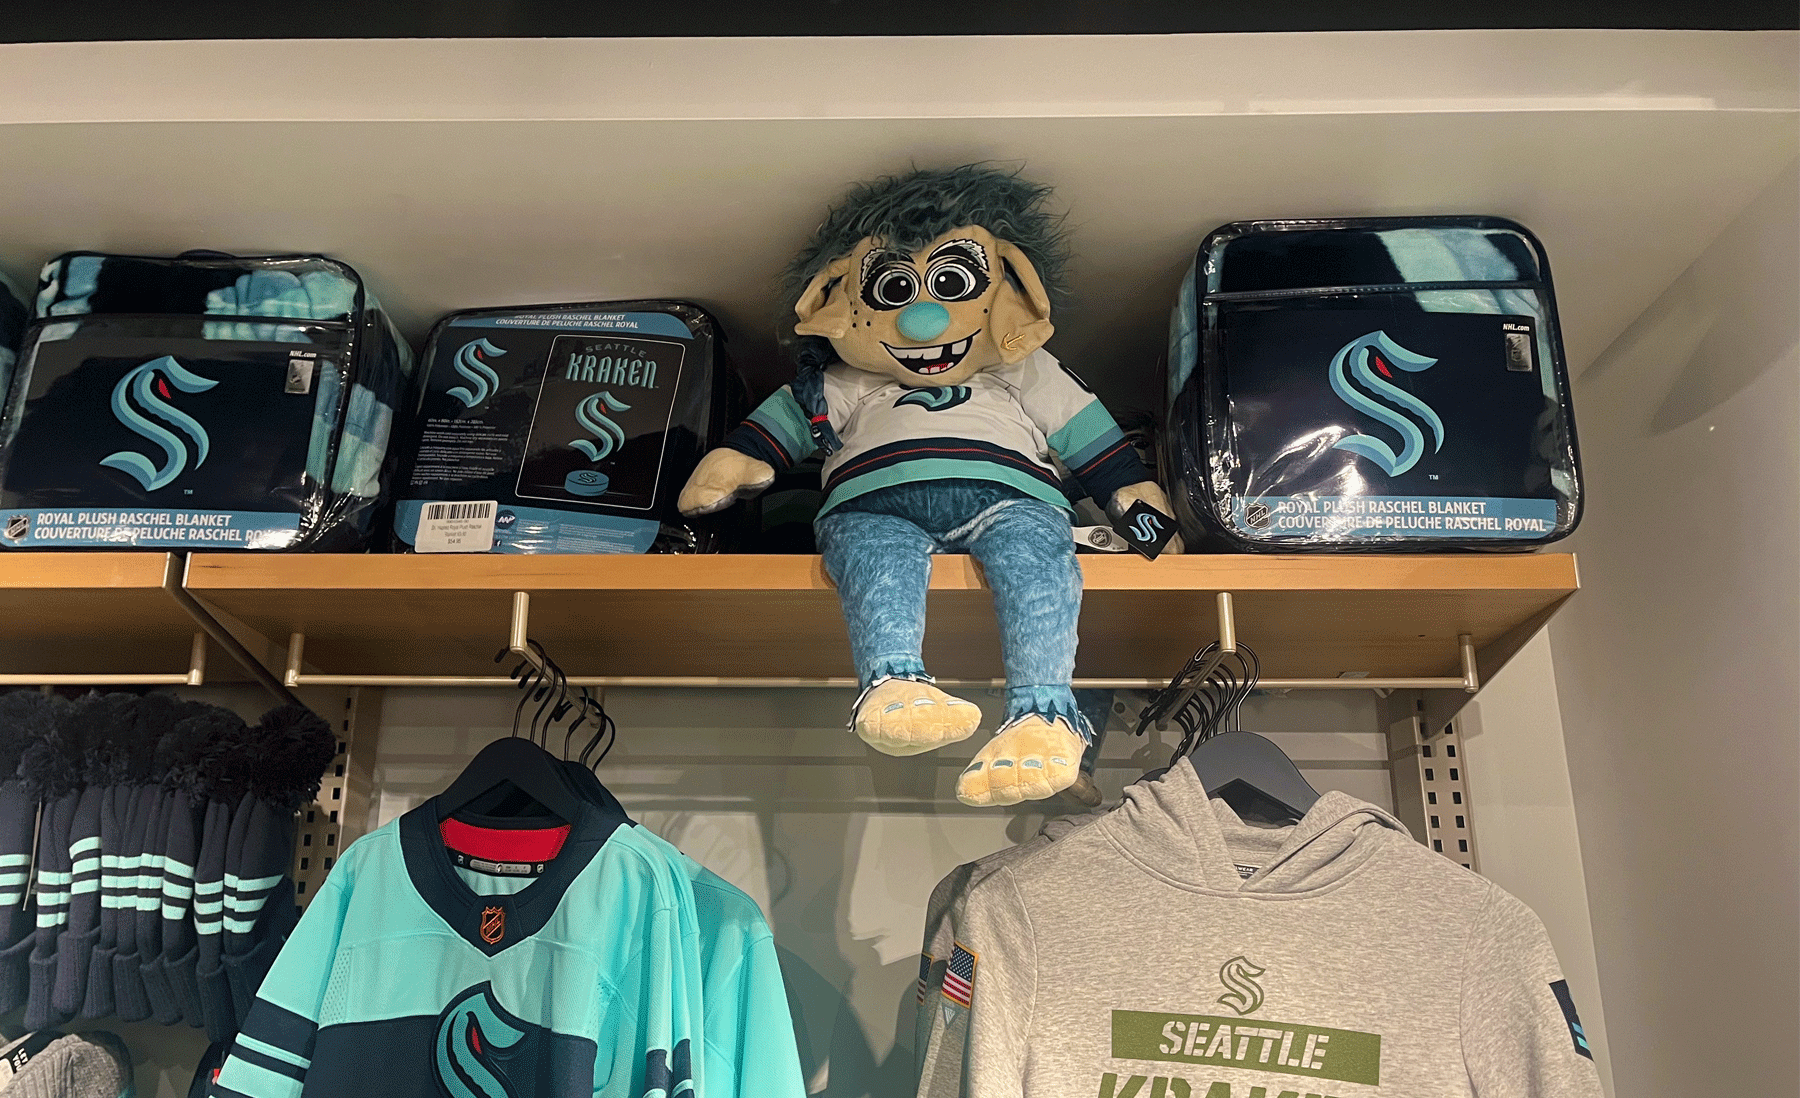 An image of a shelf of merchandise in the Seattle Kraken store. There is a plush toy of the troll mascot, Buoy sitting on the shelf in a Seattle Kraken jersey. 